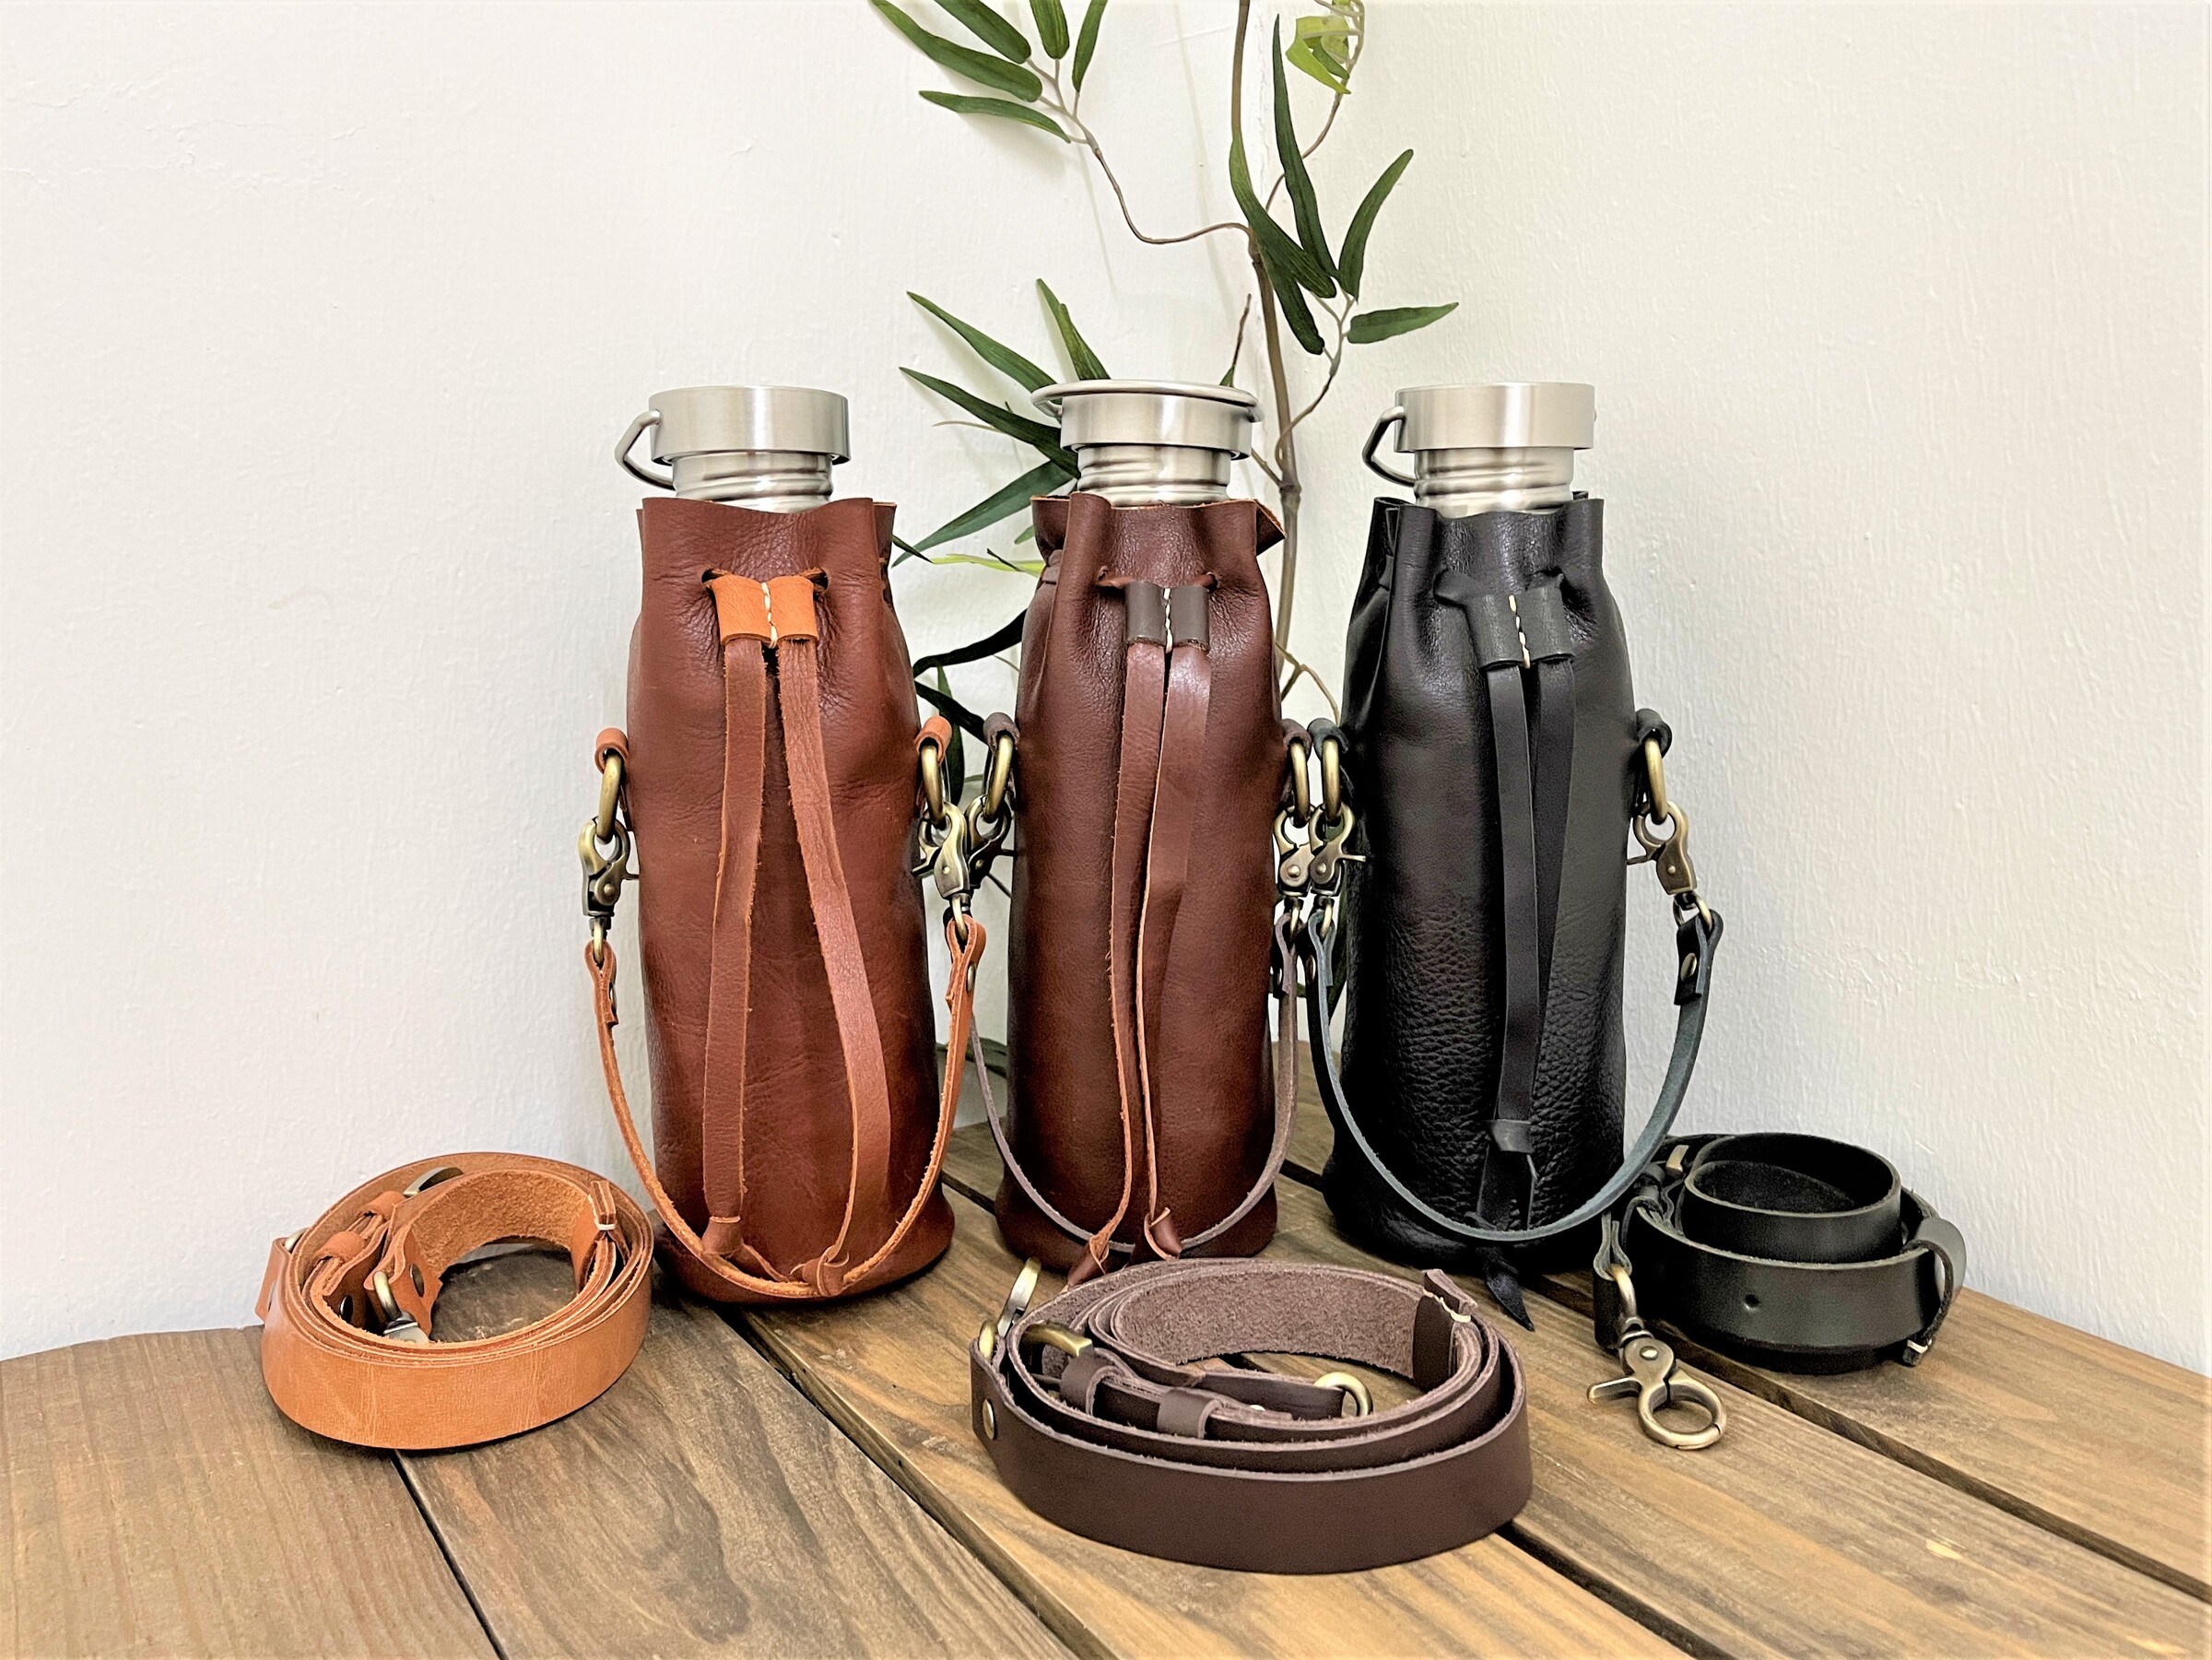 Leather Water Bottle Holder with Detachable Crossbody Strap